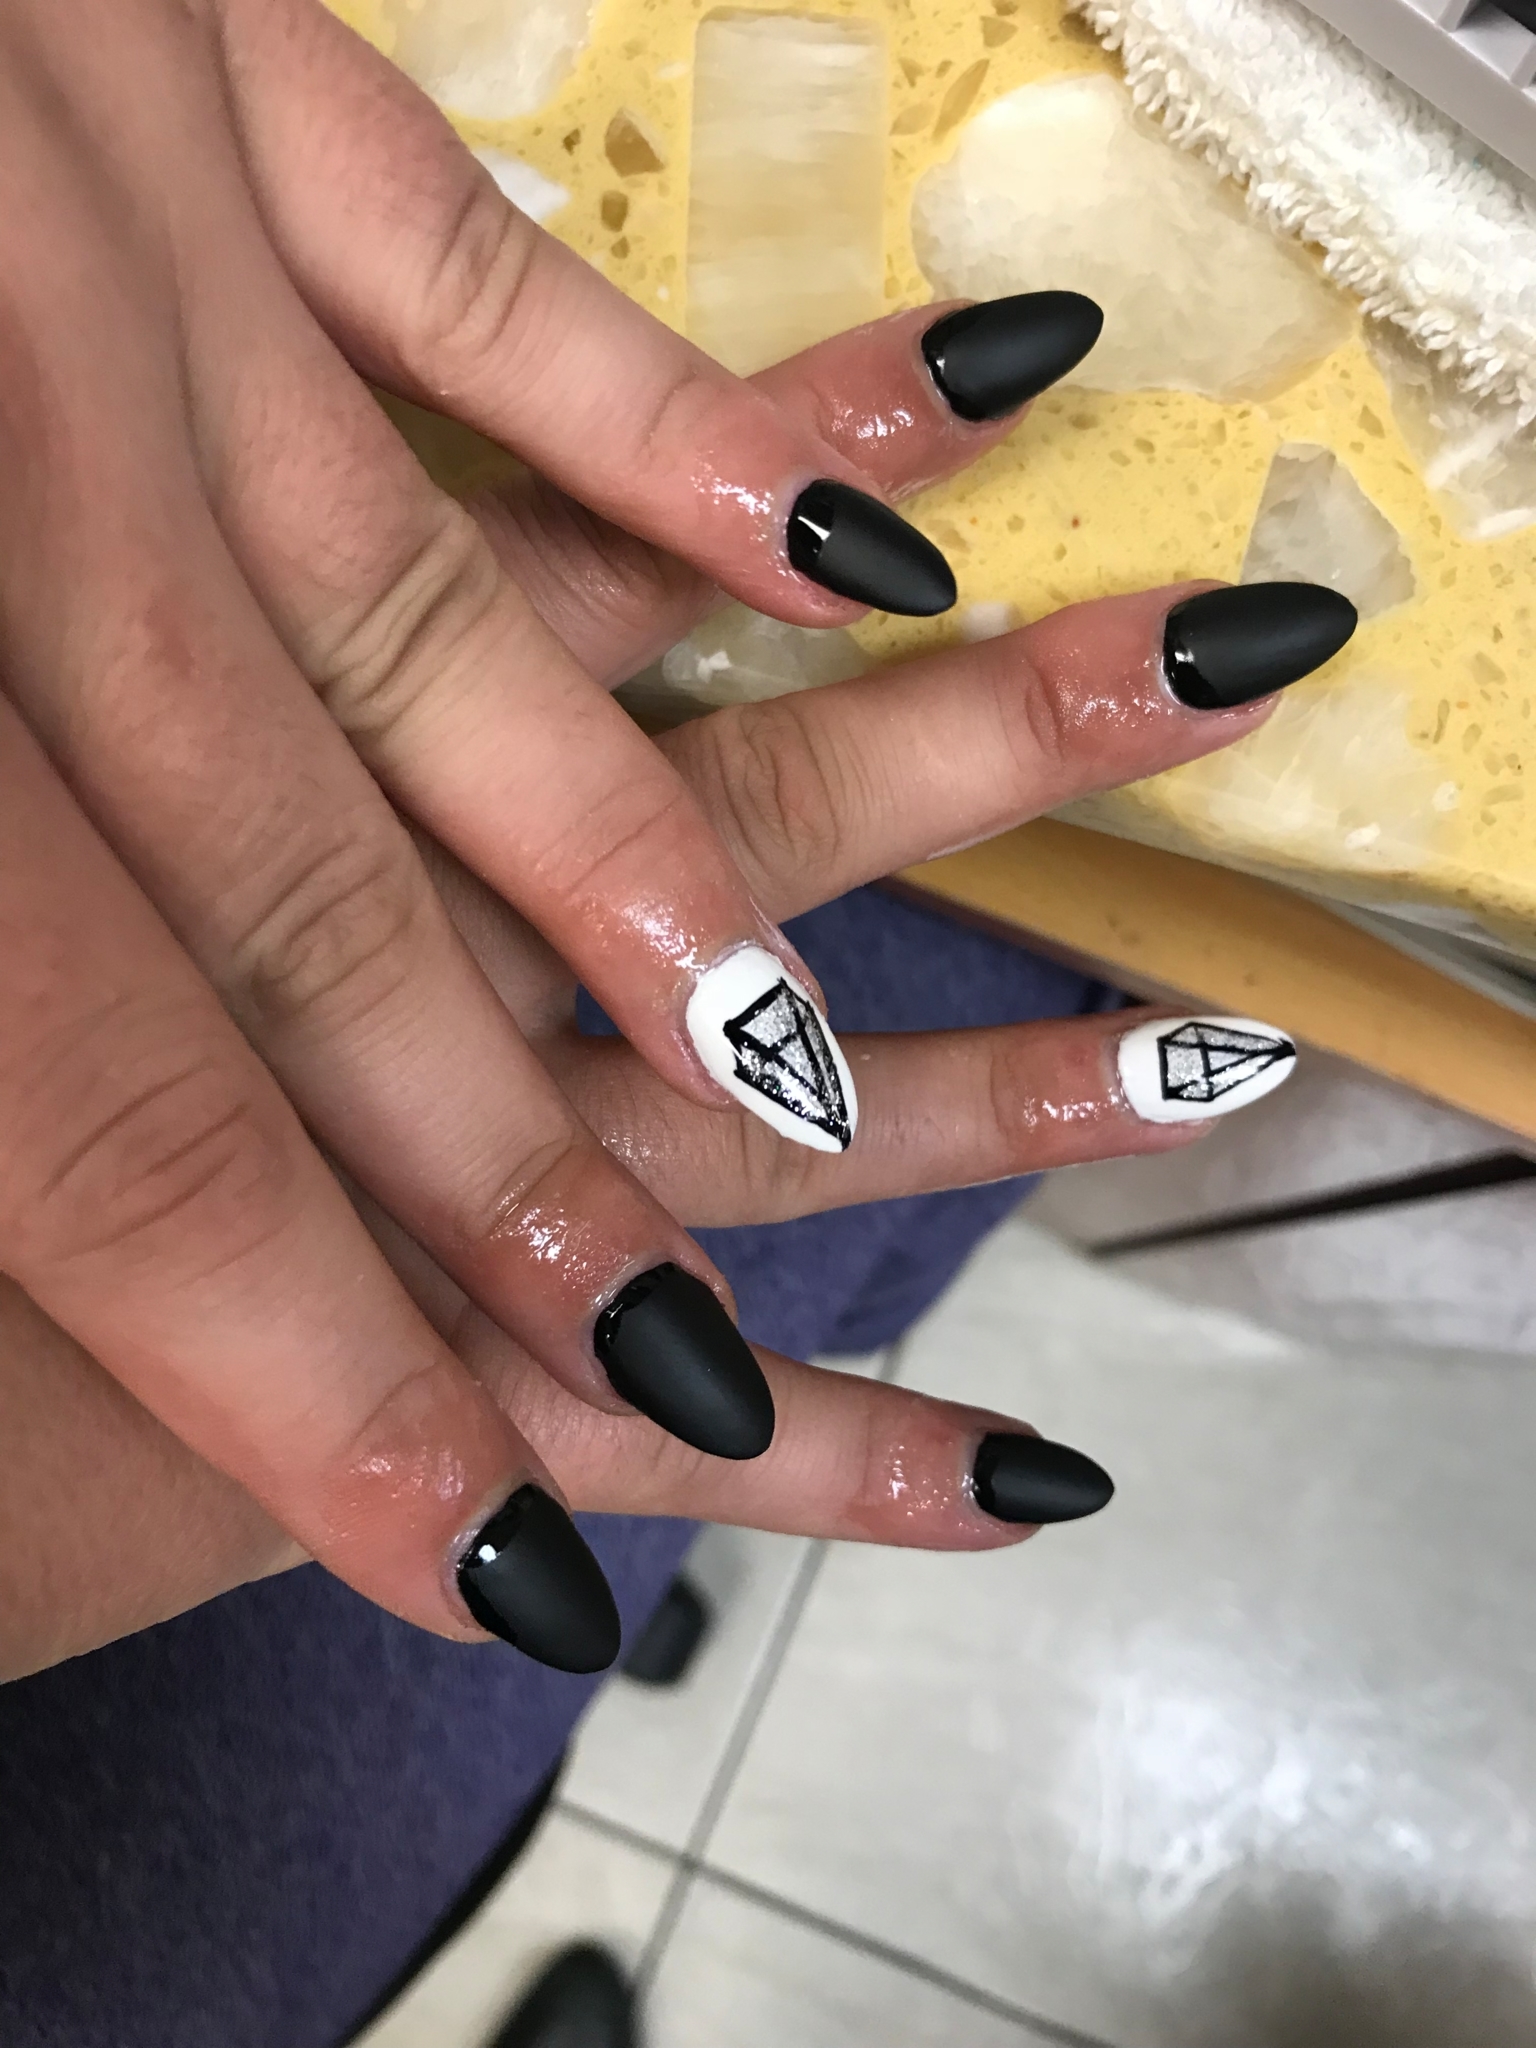 The Worst Reviewed Nail Salon Near Me - Nail and Manicure Trends